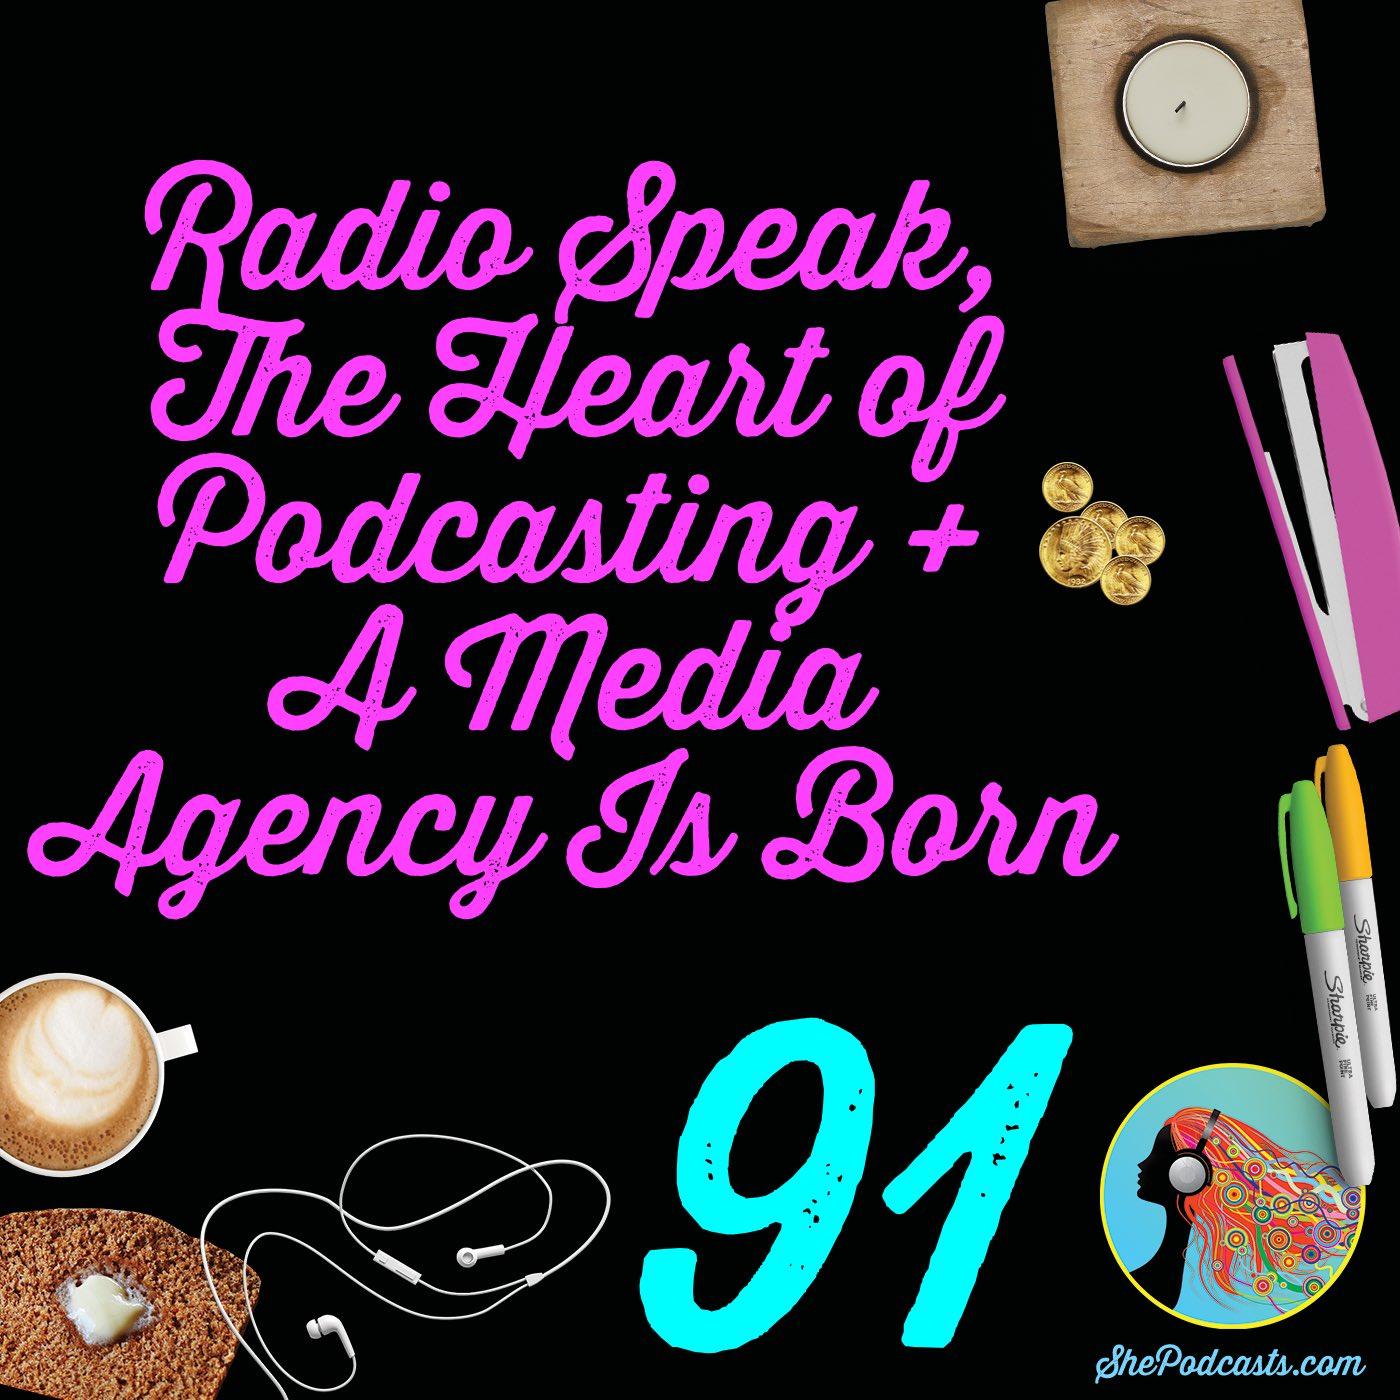 091 Radio Speak The Heart of Podcasting And A Media Agency Is Born